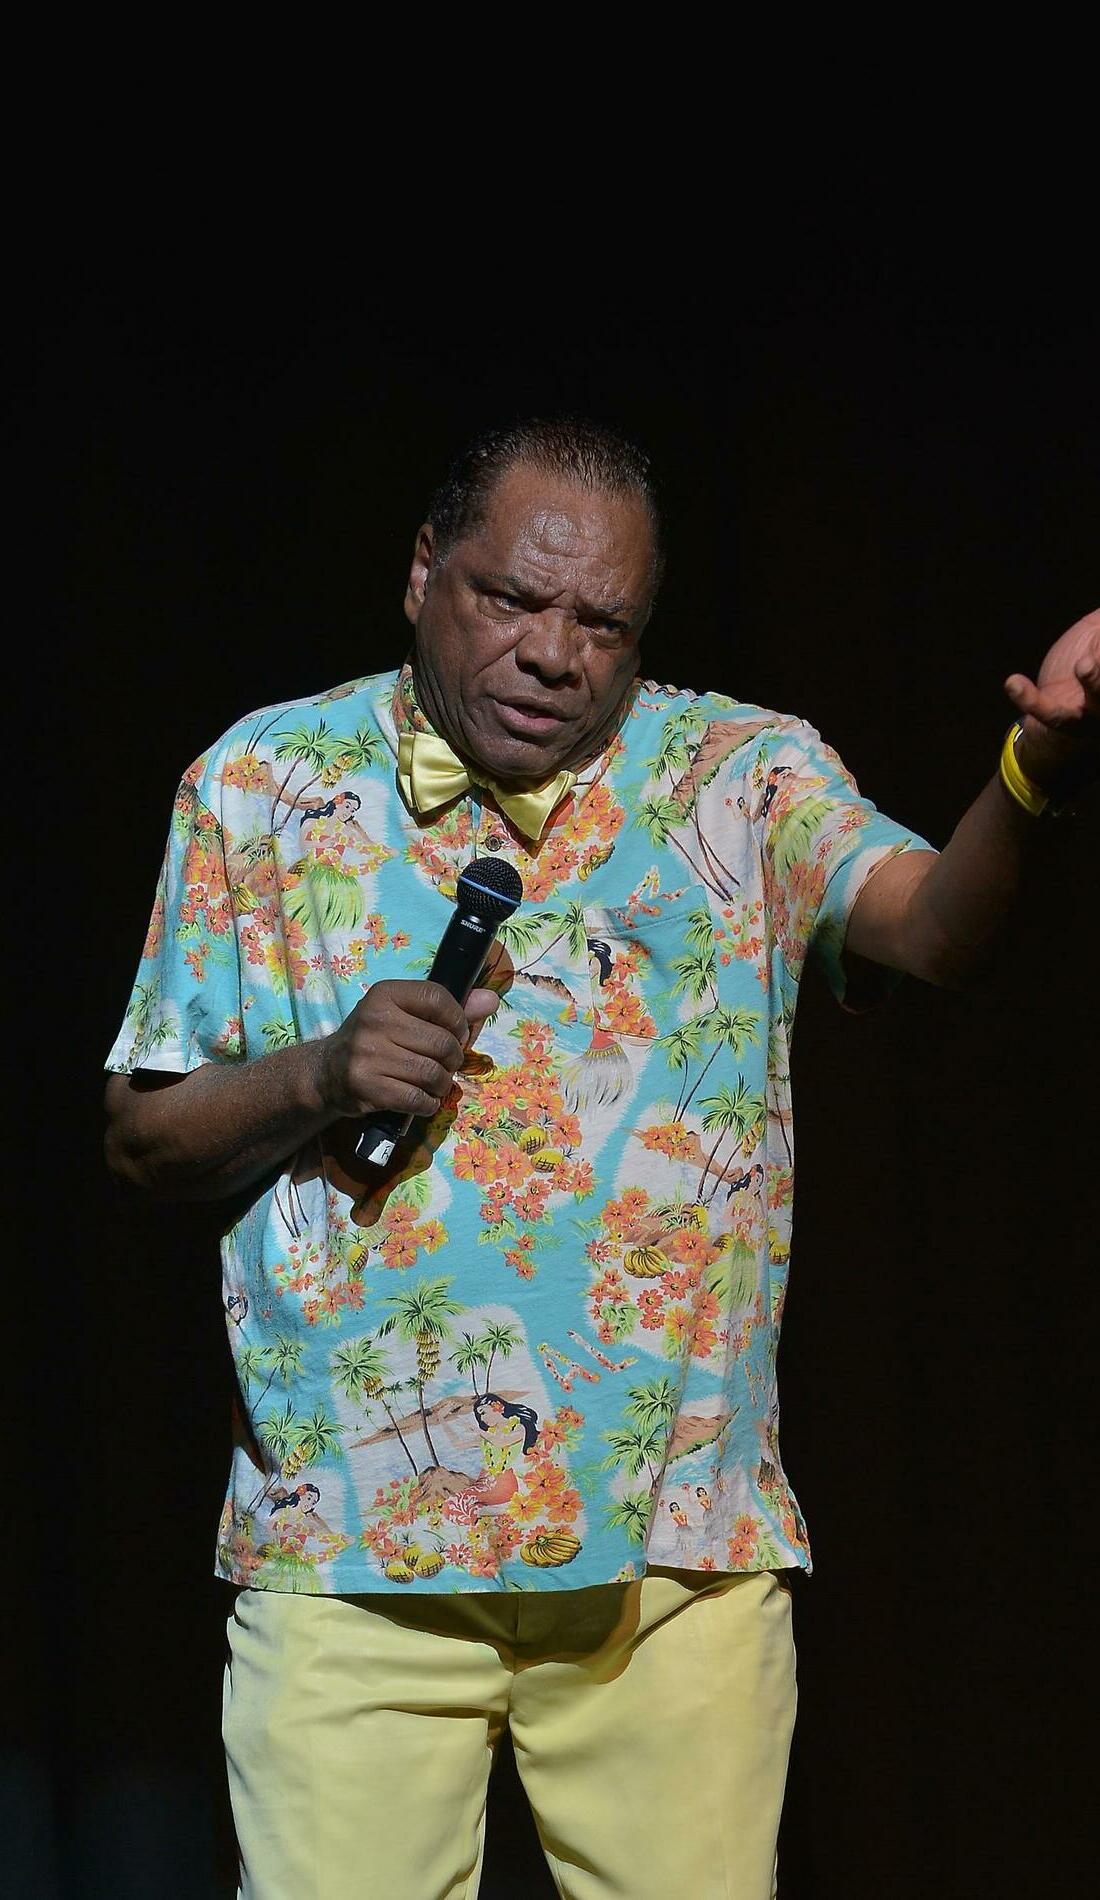 A John Witherspoon live event